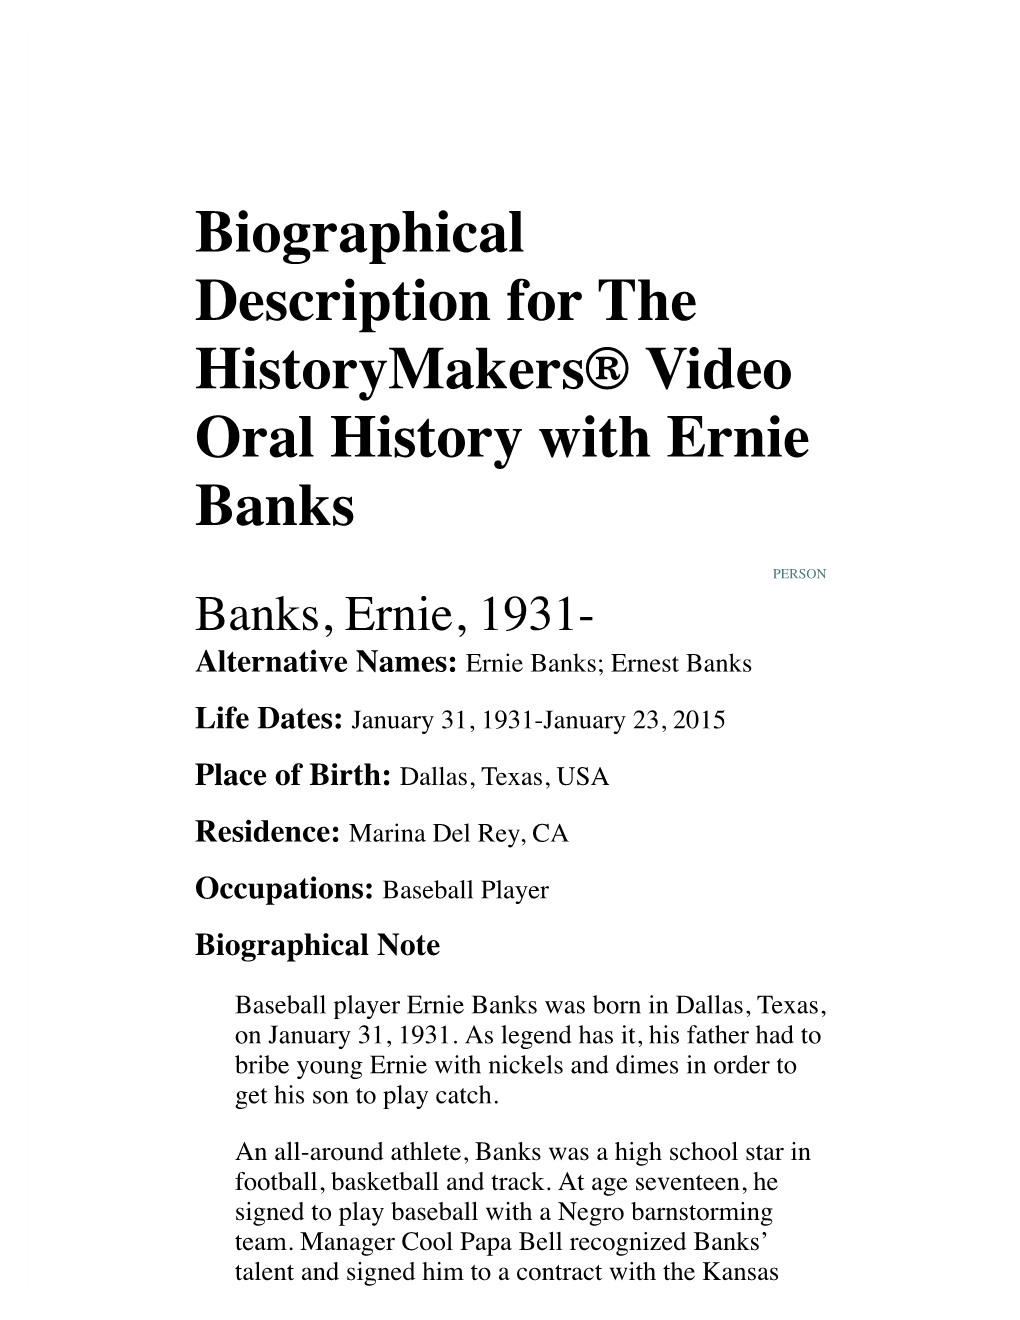 Biographical Description for the Historymakers® Video Oral History with Ernie Banks